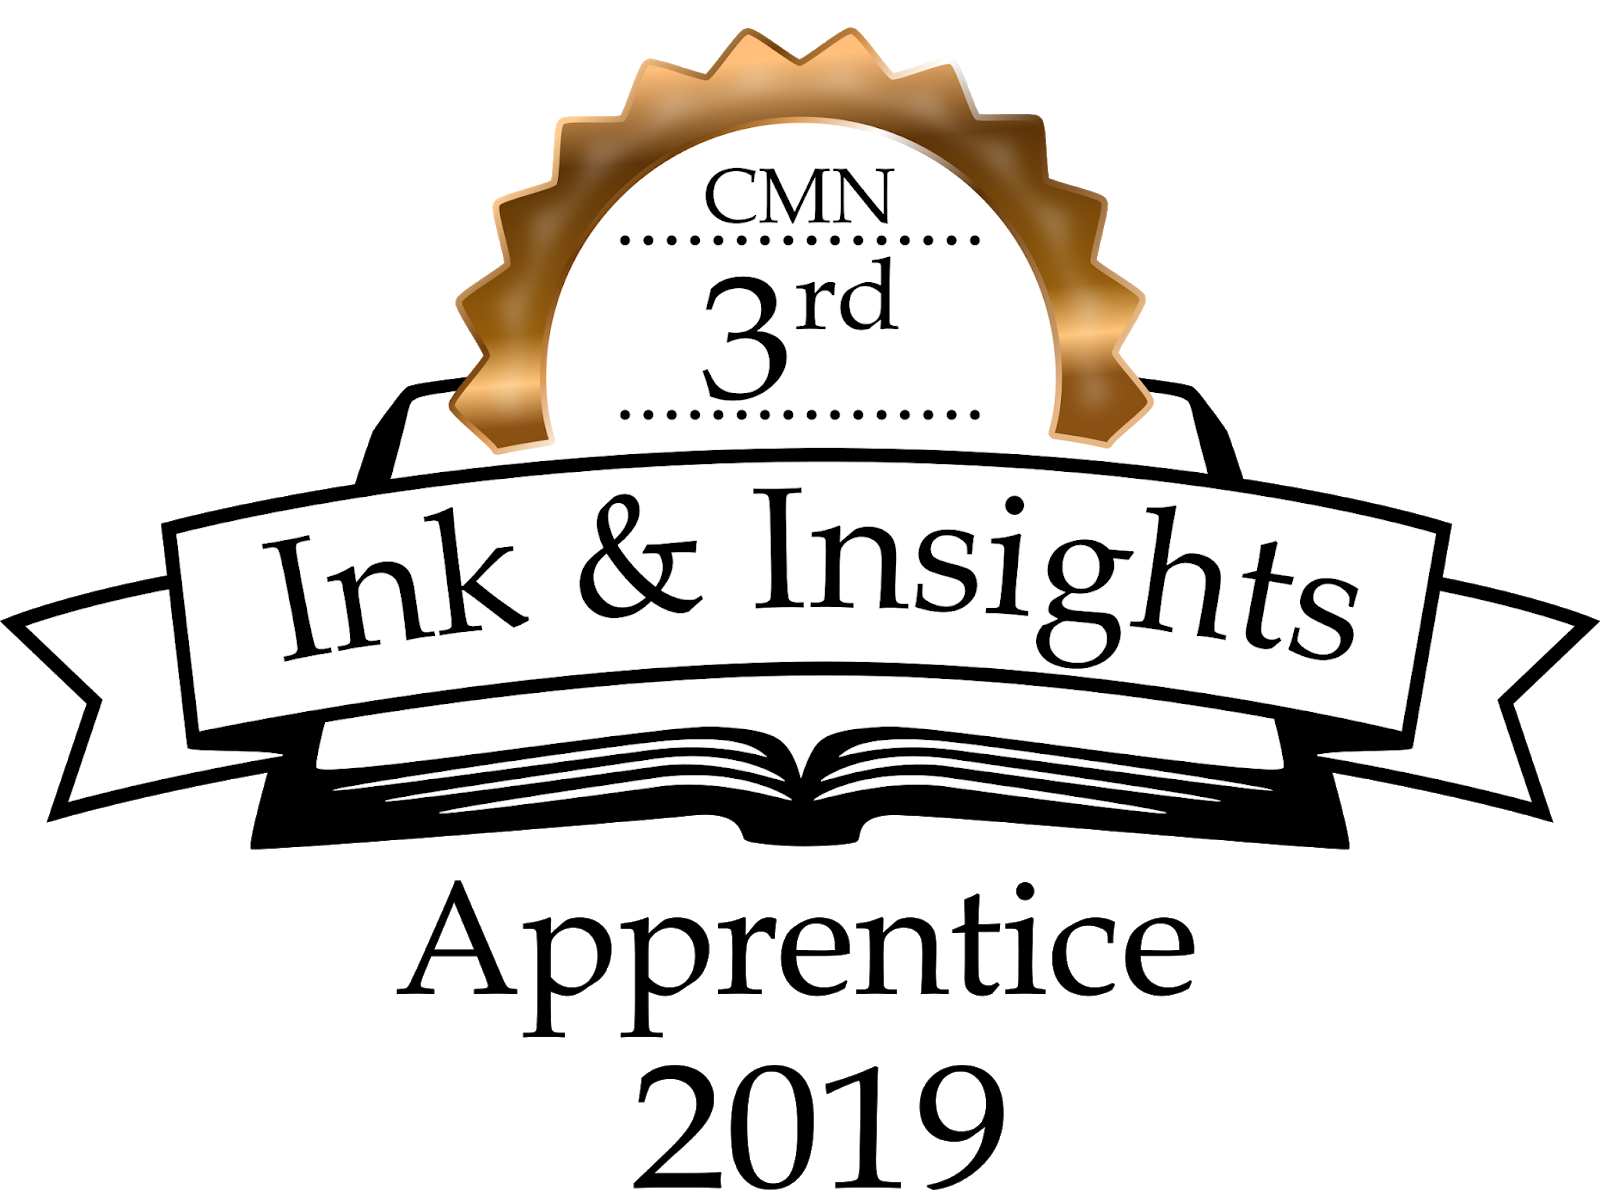 Inks & Insights 3rd Place